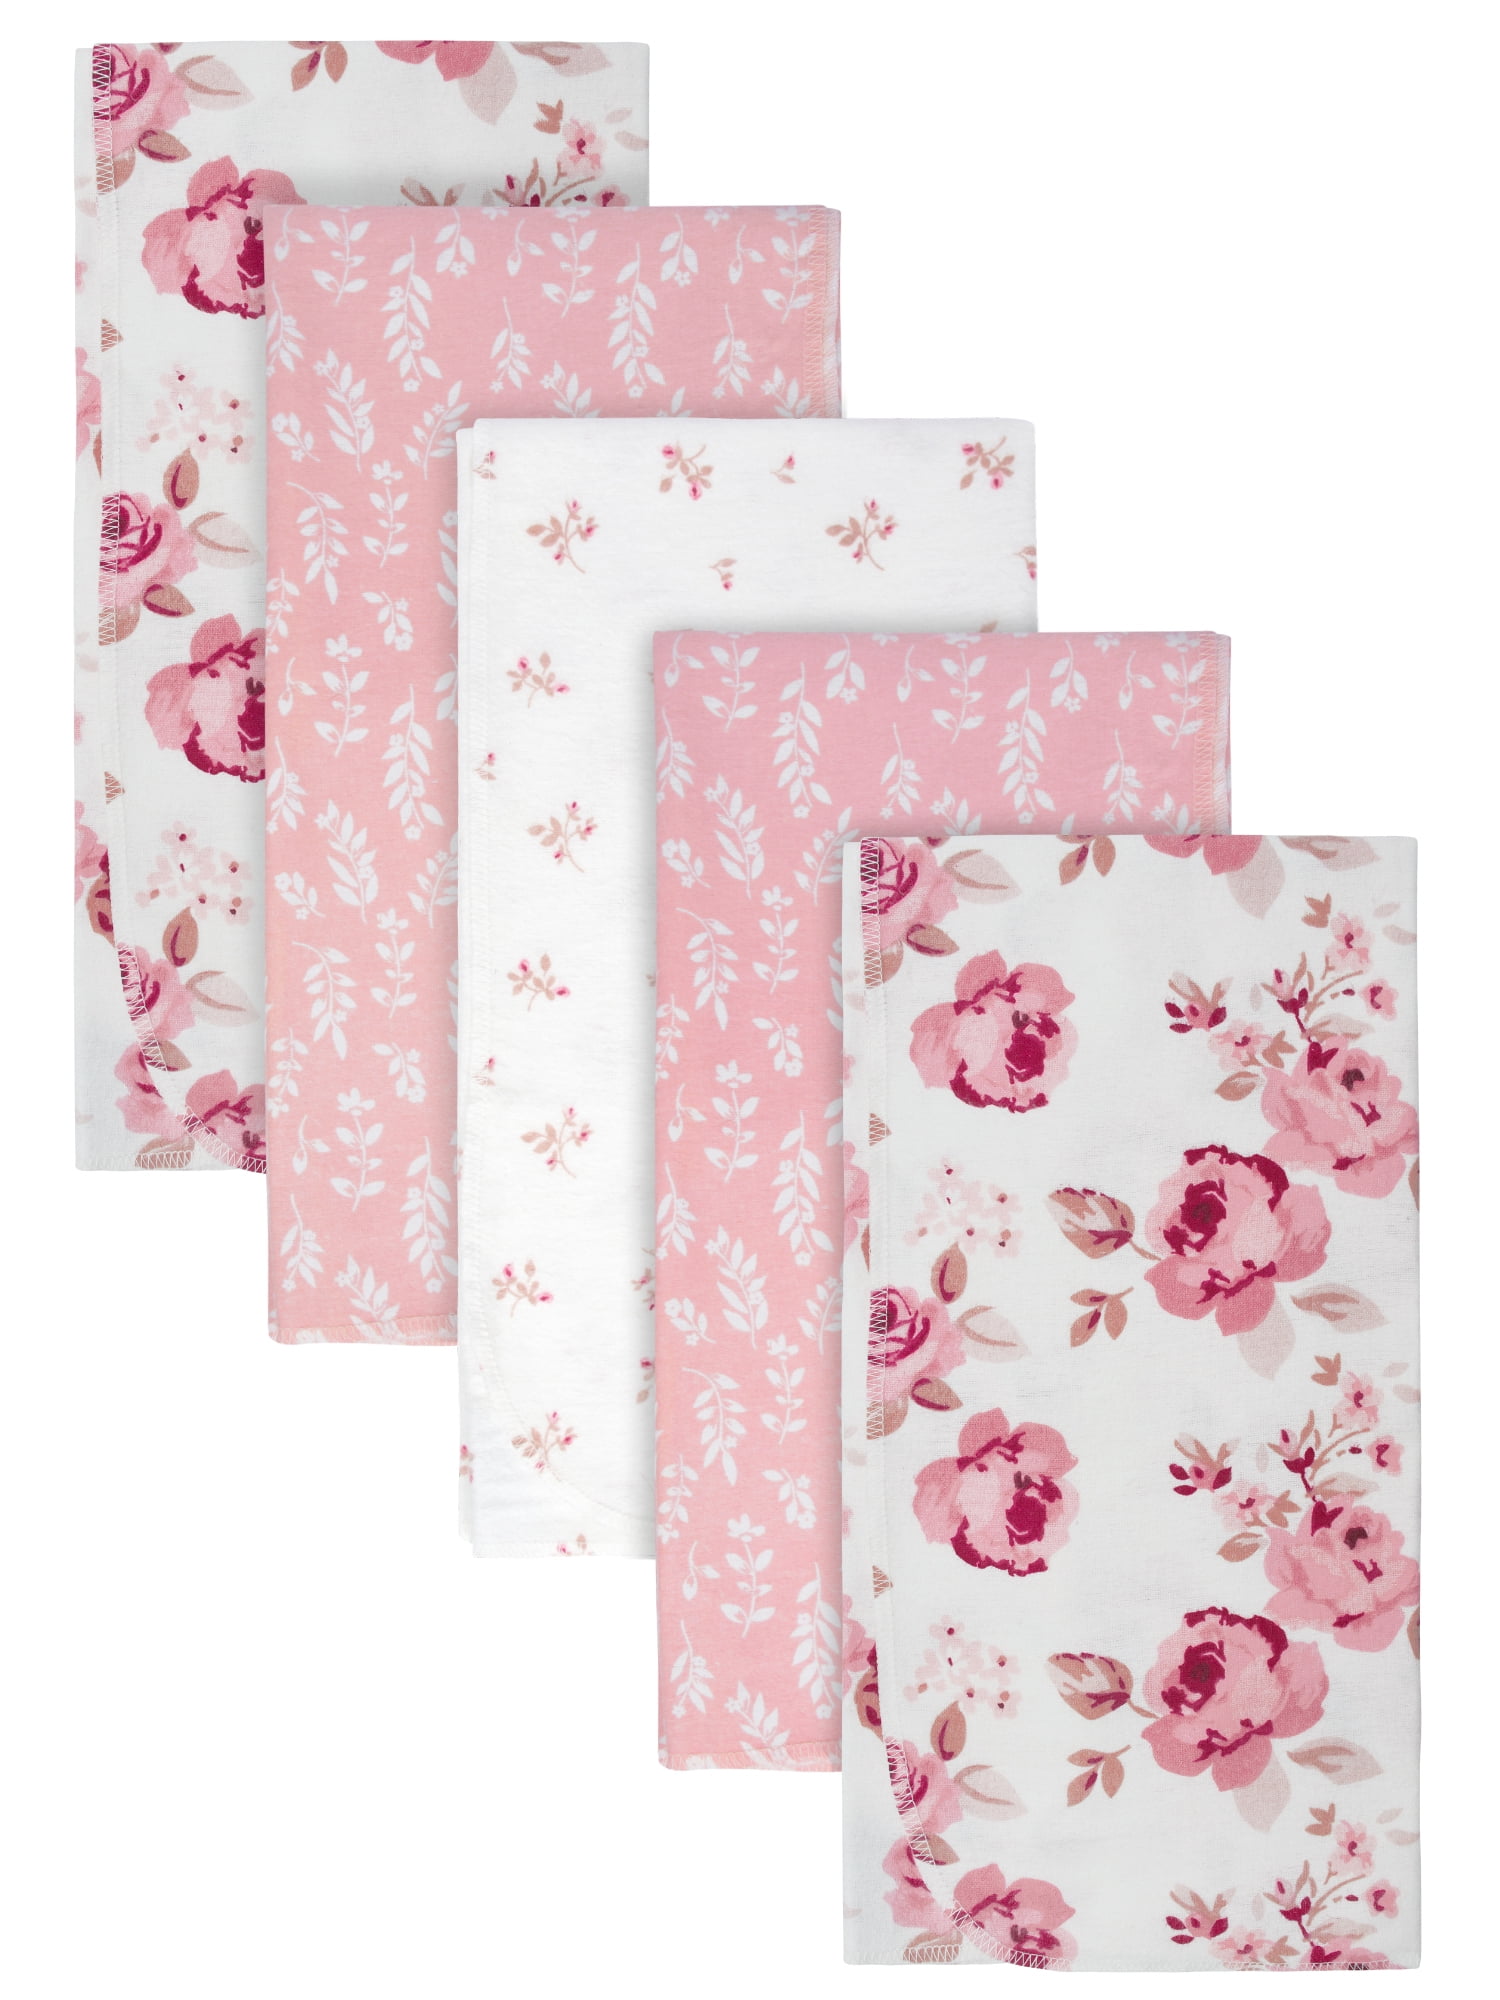 Modern Moments by Gerber Baby & Toddler Girl Flannel Blankets, 5-Pack, Pink Roses